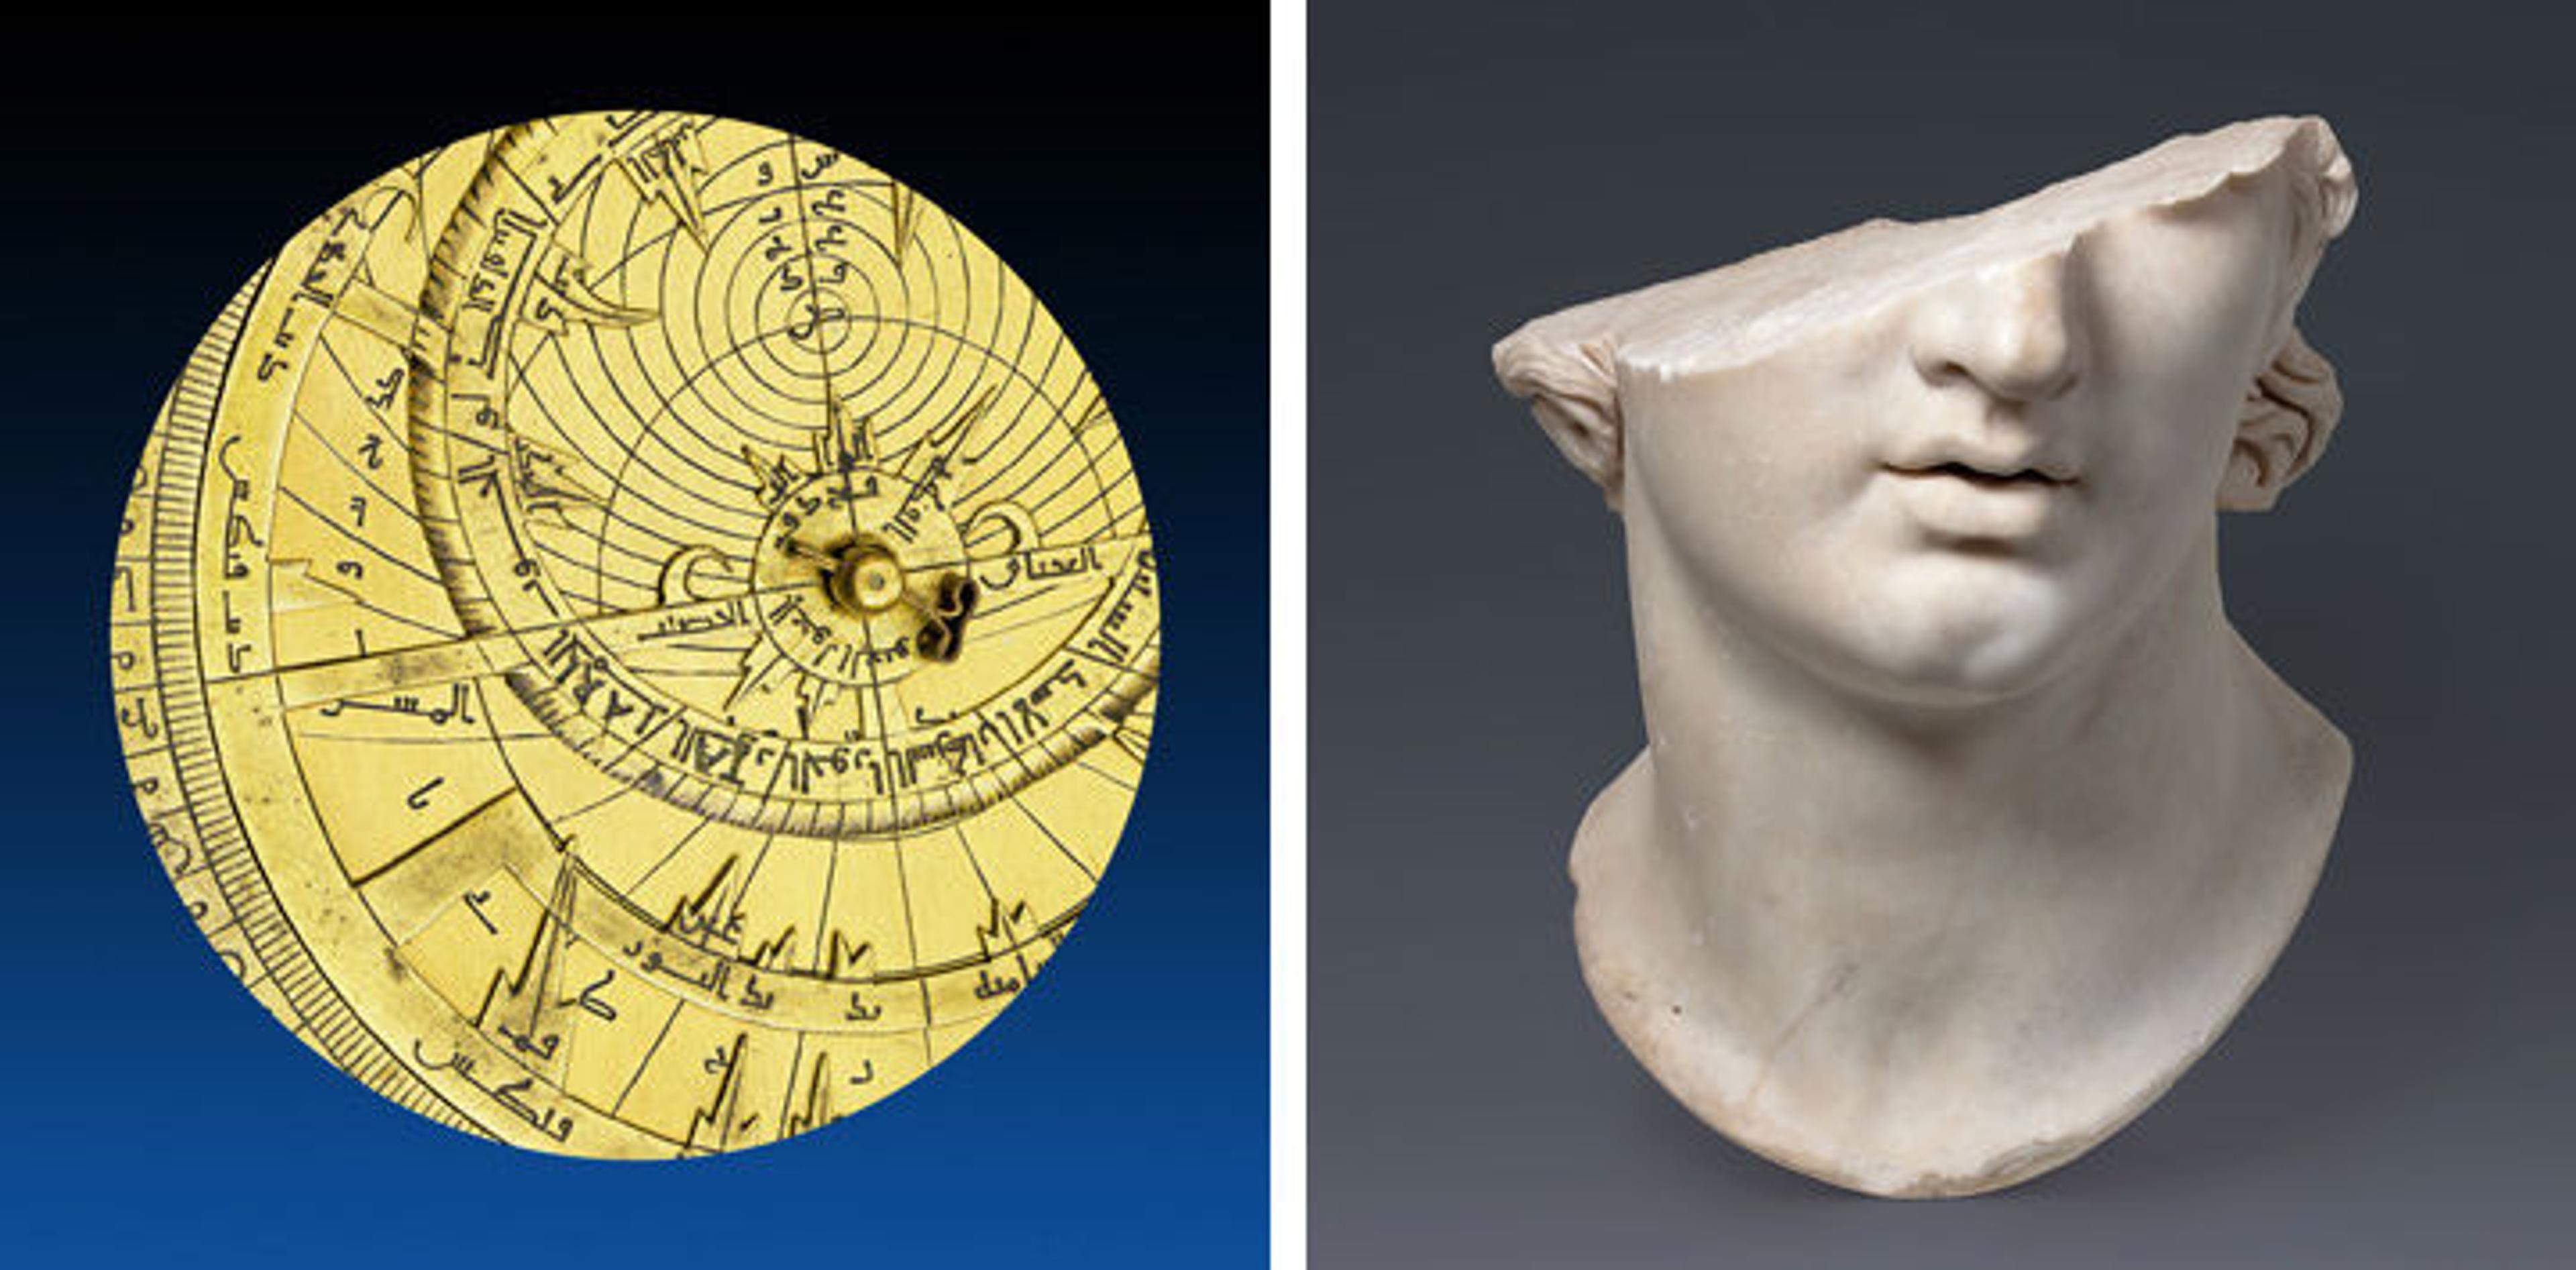 Signature exhibition images for "Court and Cosmos: The Great Age of the Seljuqs" (left) and "Pergamon and the Hellenistic Kingdoms of the Ancient World" (right)